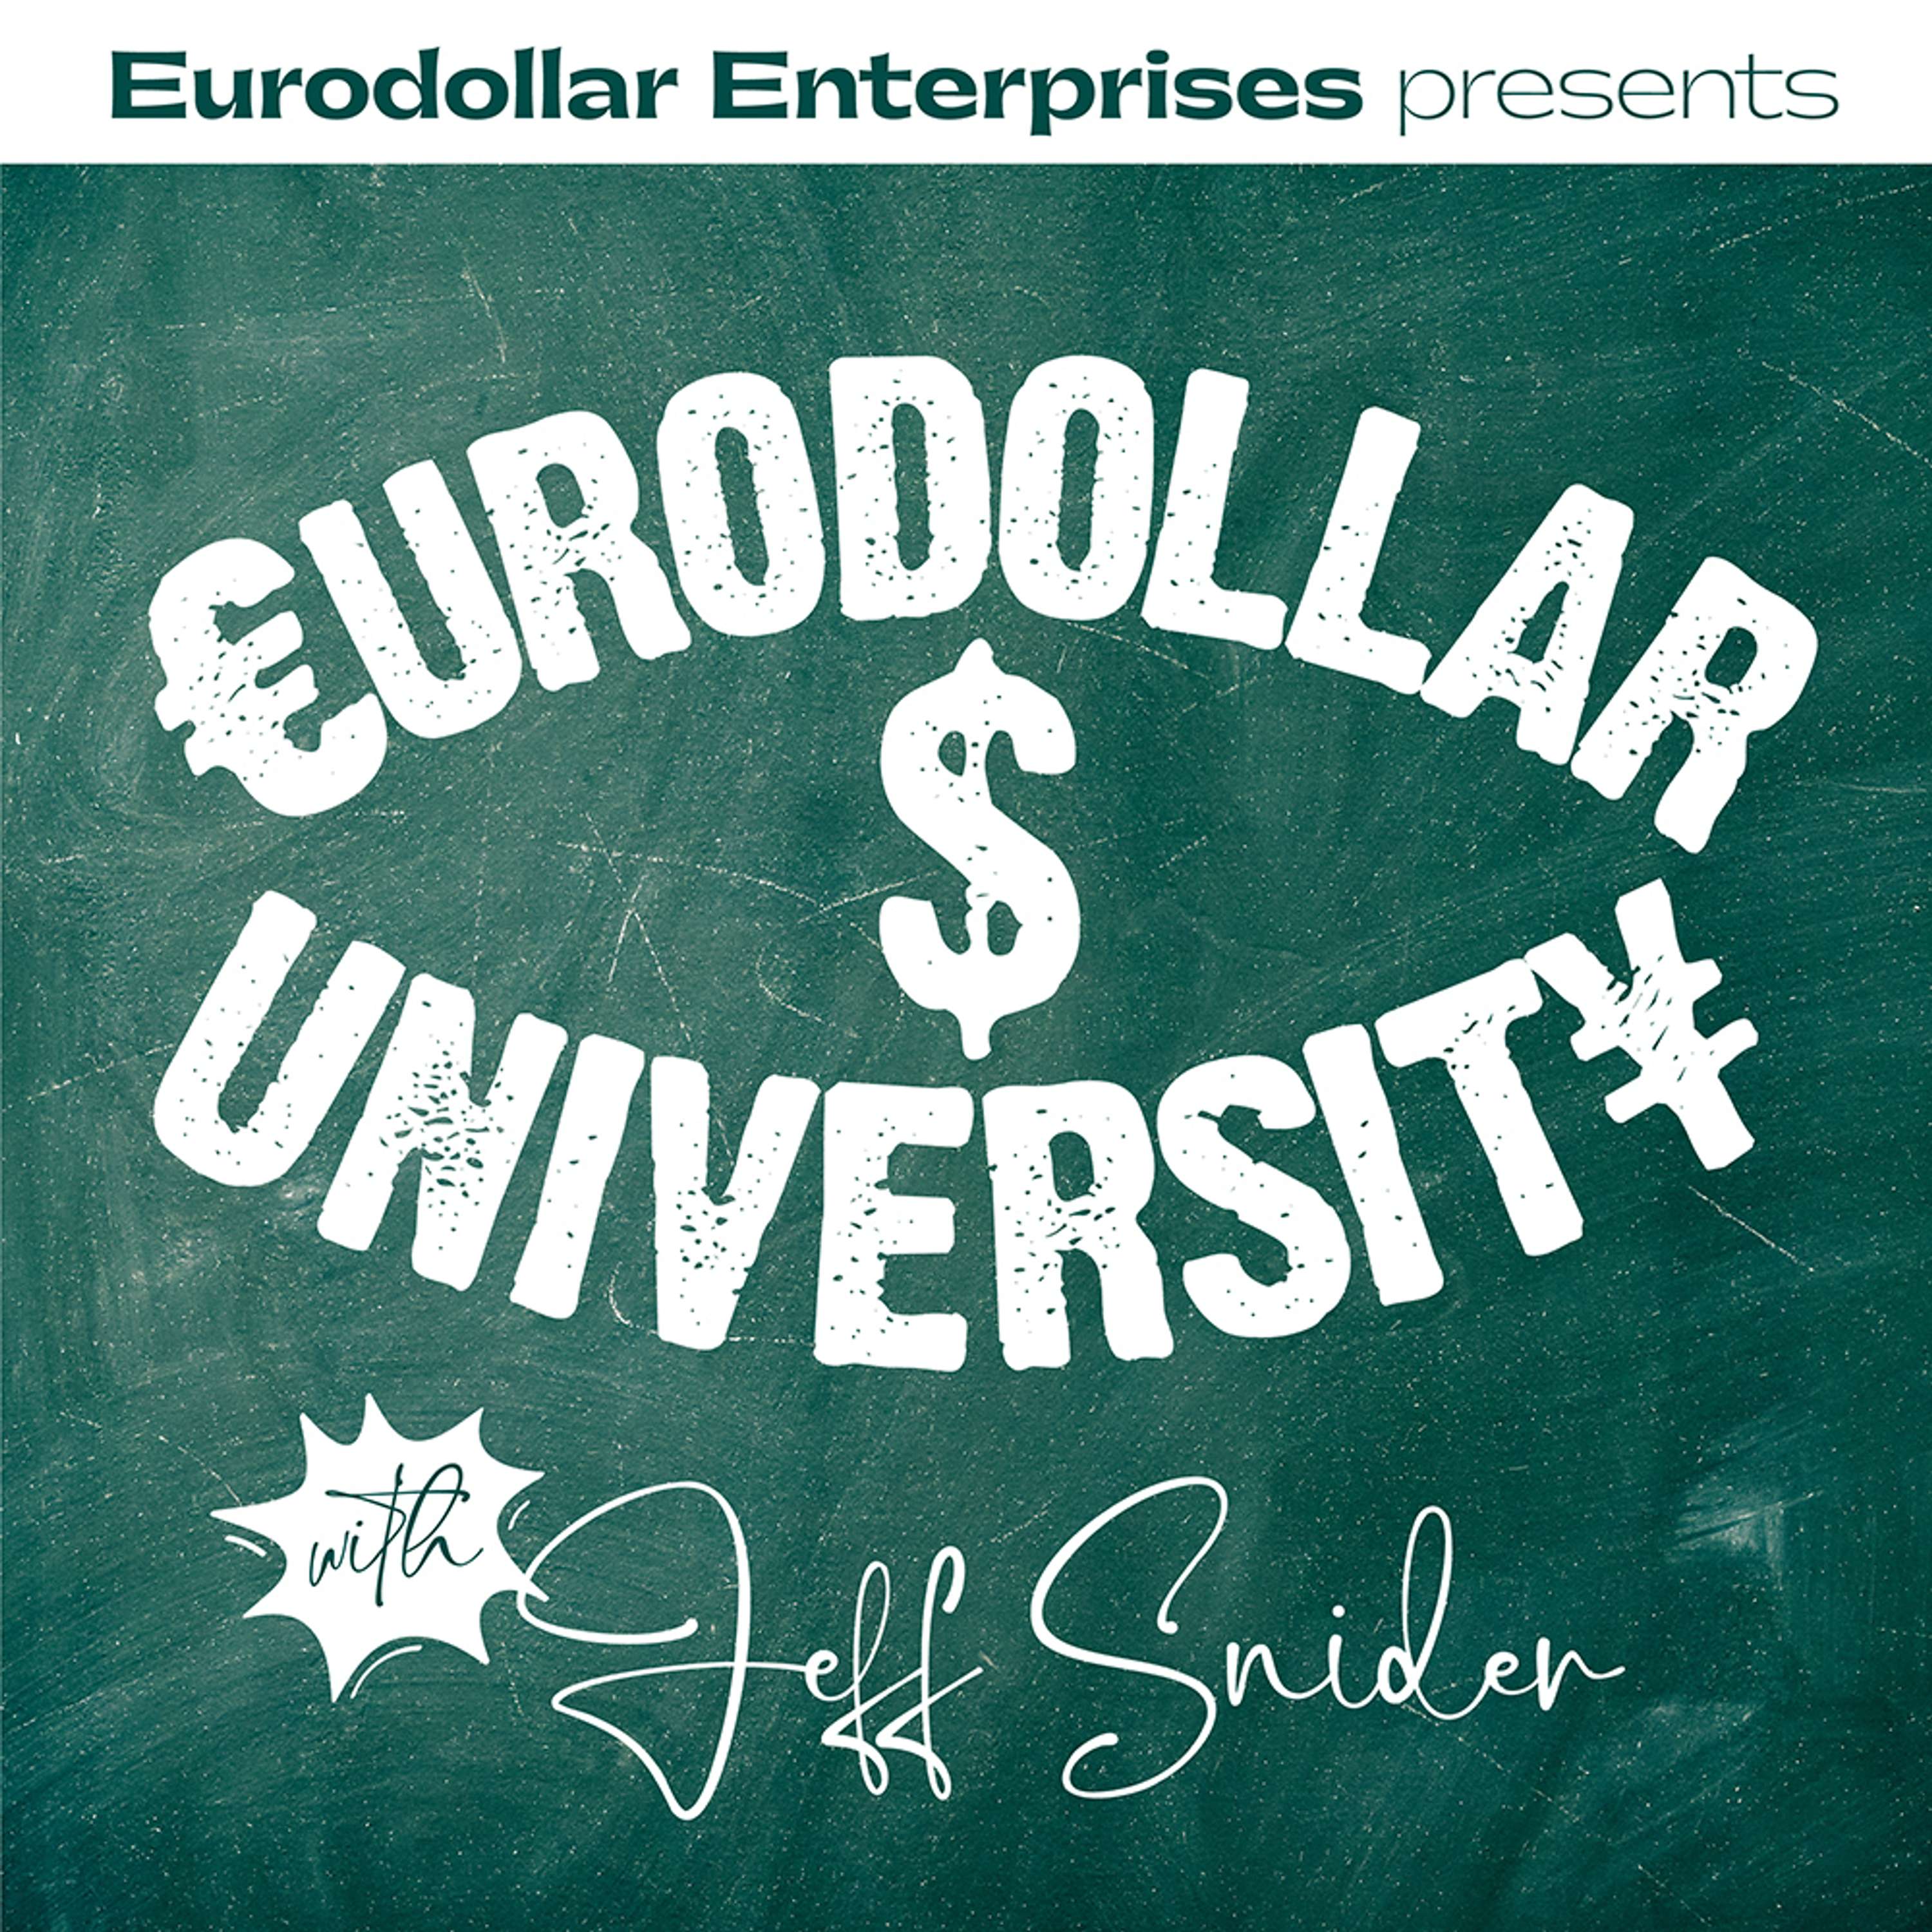 Epic Supply Shock Powers Inflation in US [Eurodollar University, Ep. 210]